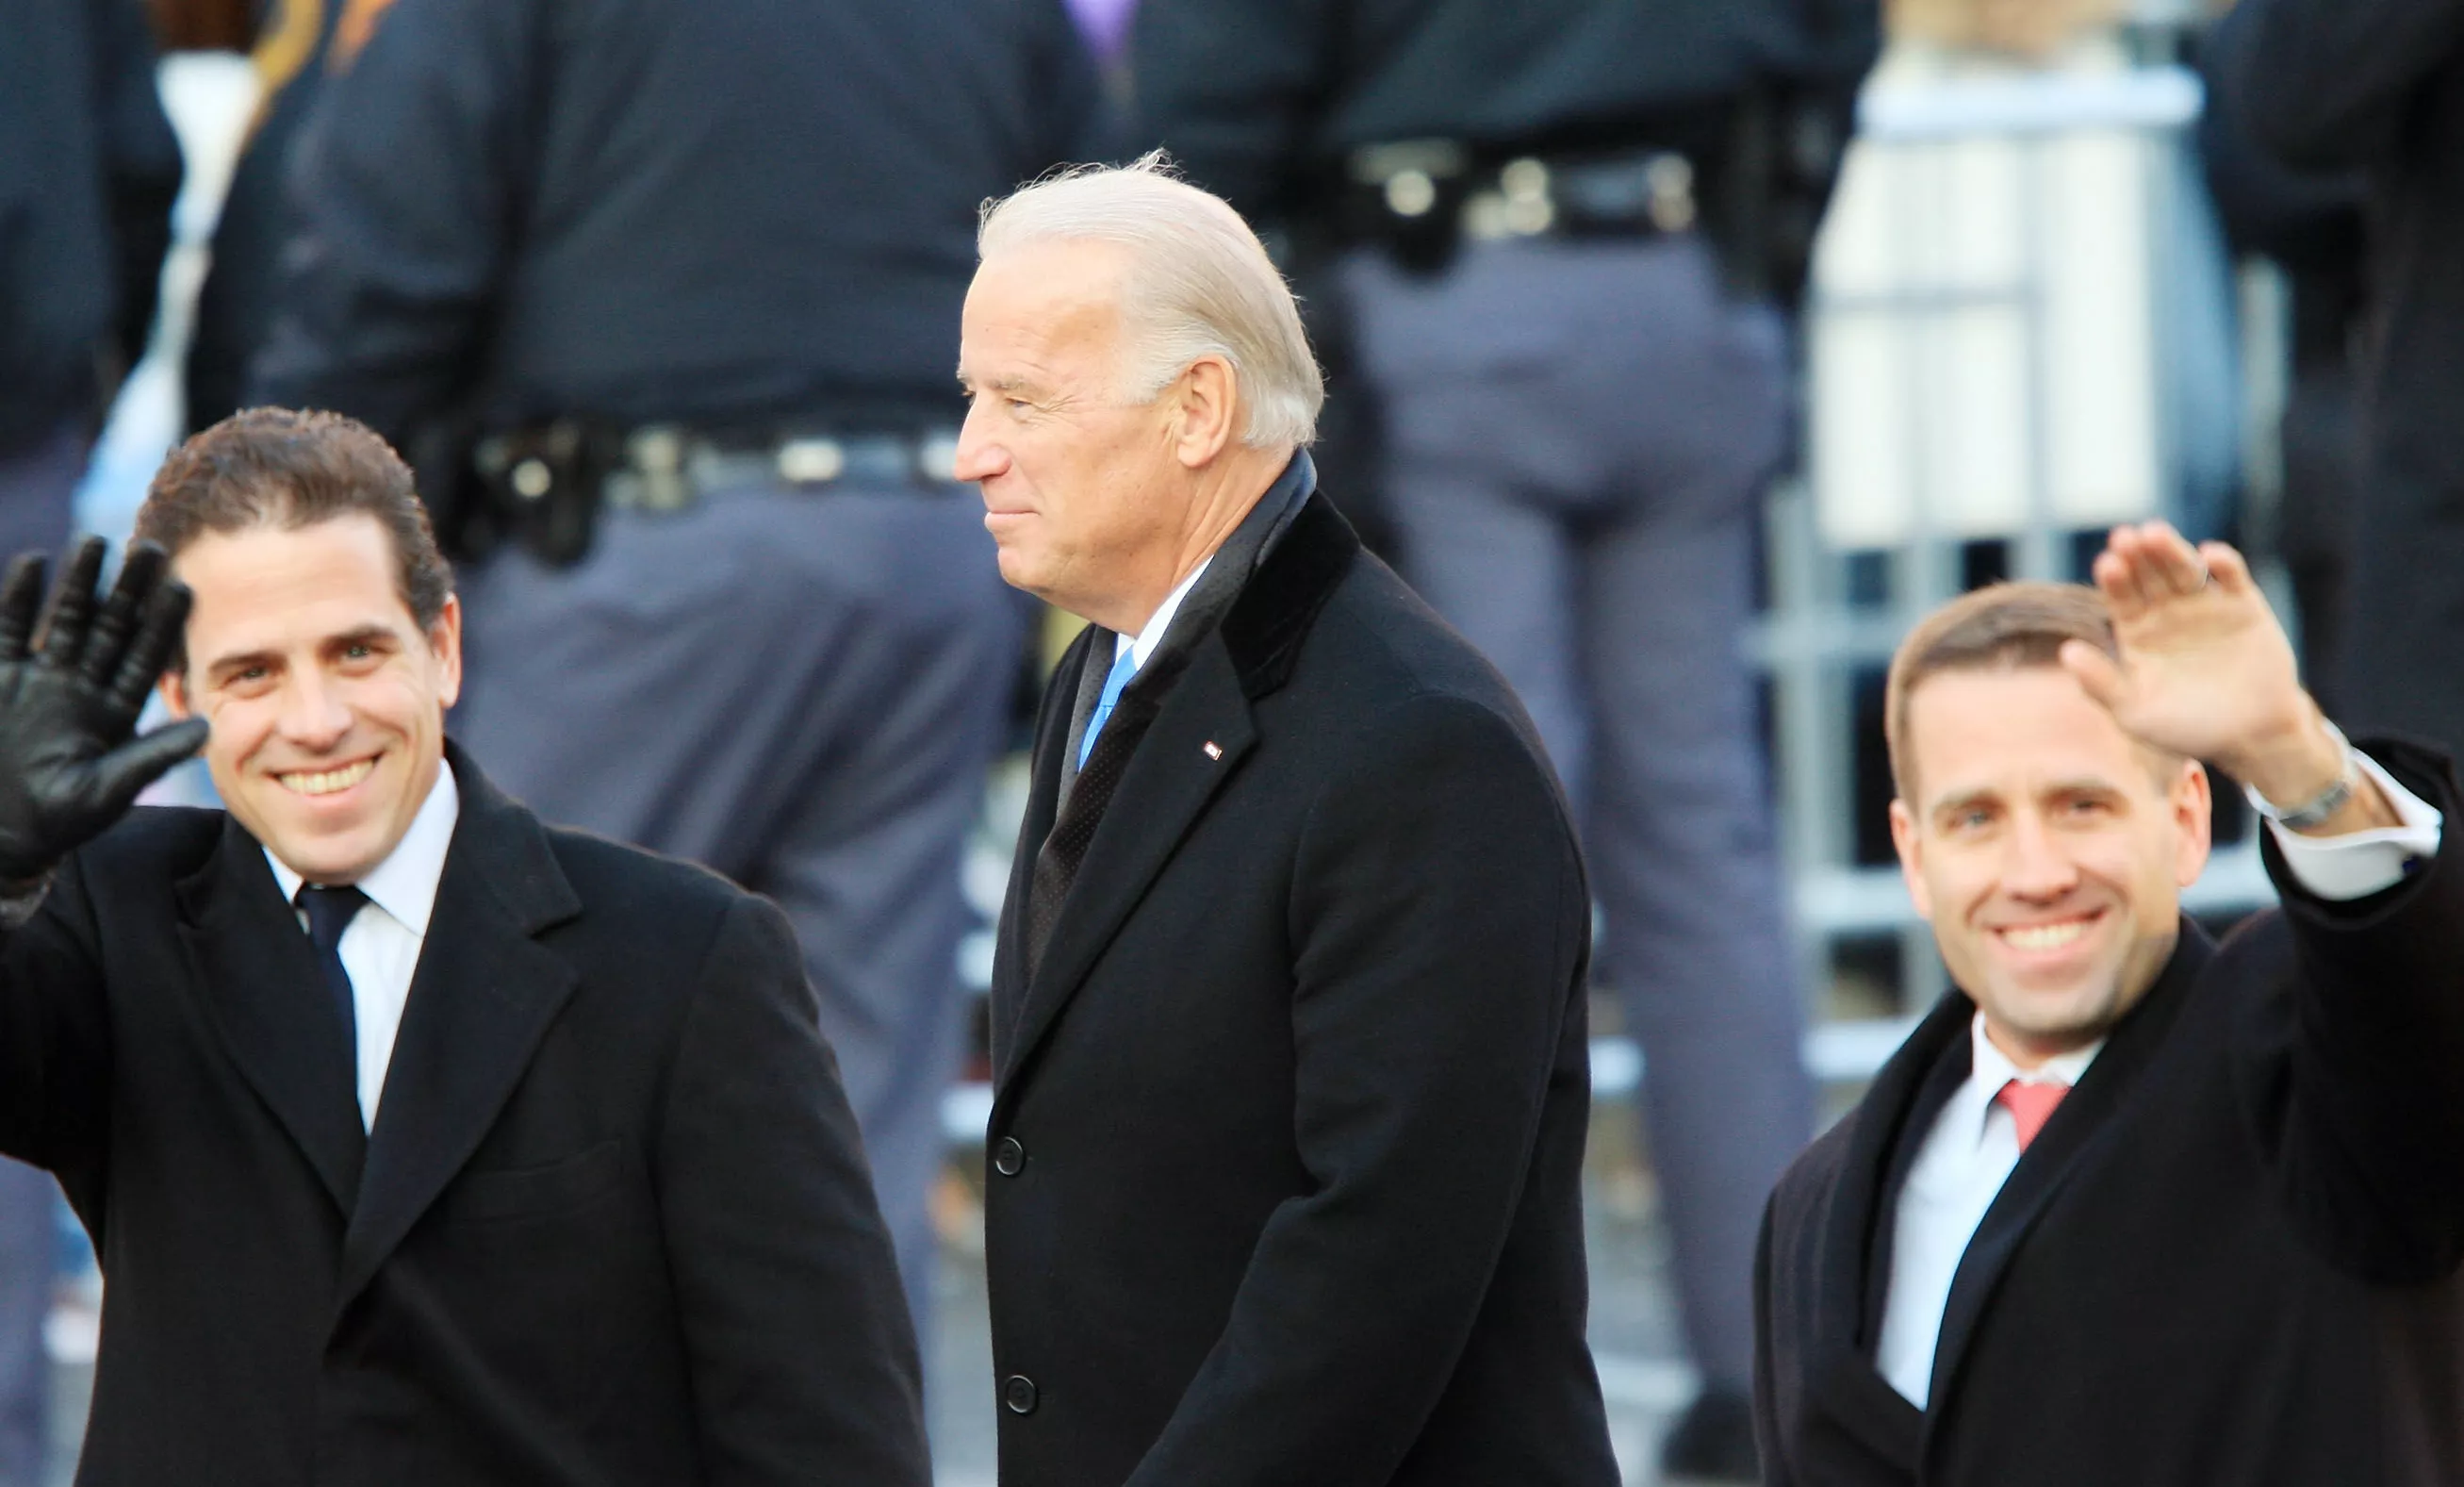 Vice-President Joe Biden and sons Hunter Biden (L) and Beau Biden walk in the Inaugural Parade January 20, 2009 in Washington, DC. Barack Obama was sworn in as the 44th President of the United States, becoming the first African-American to be elected President of the US